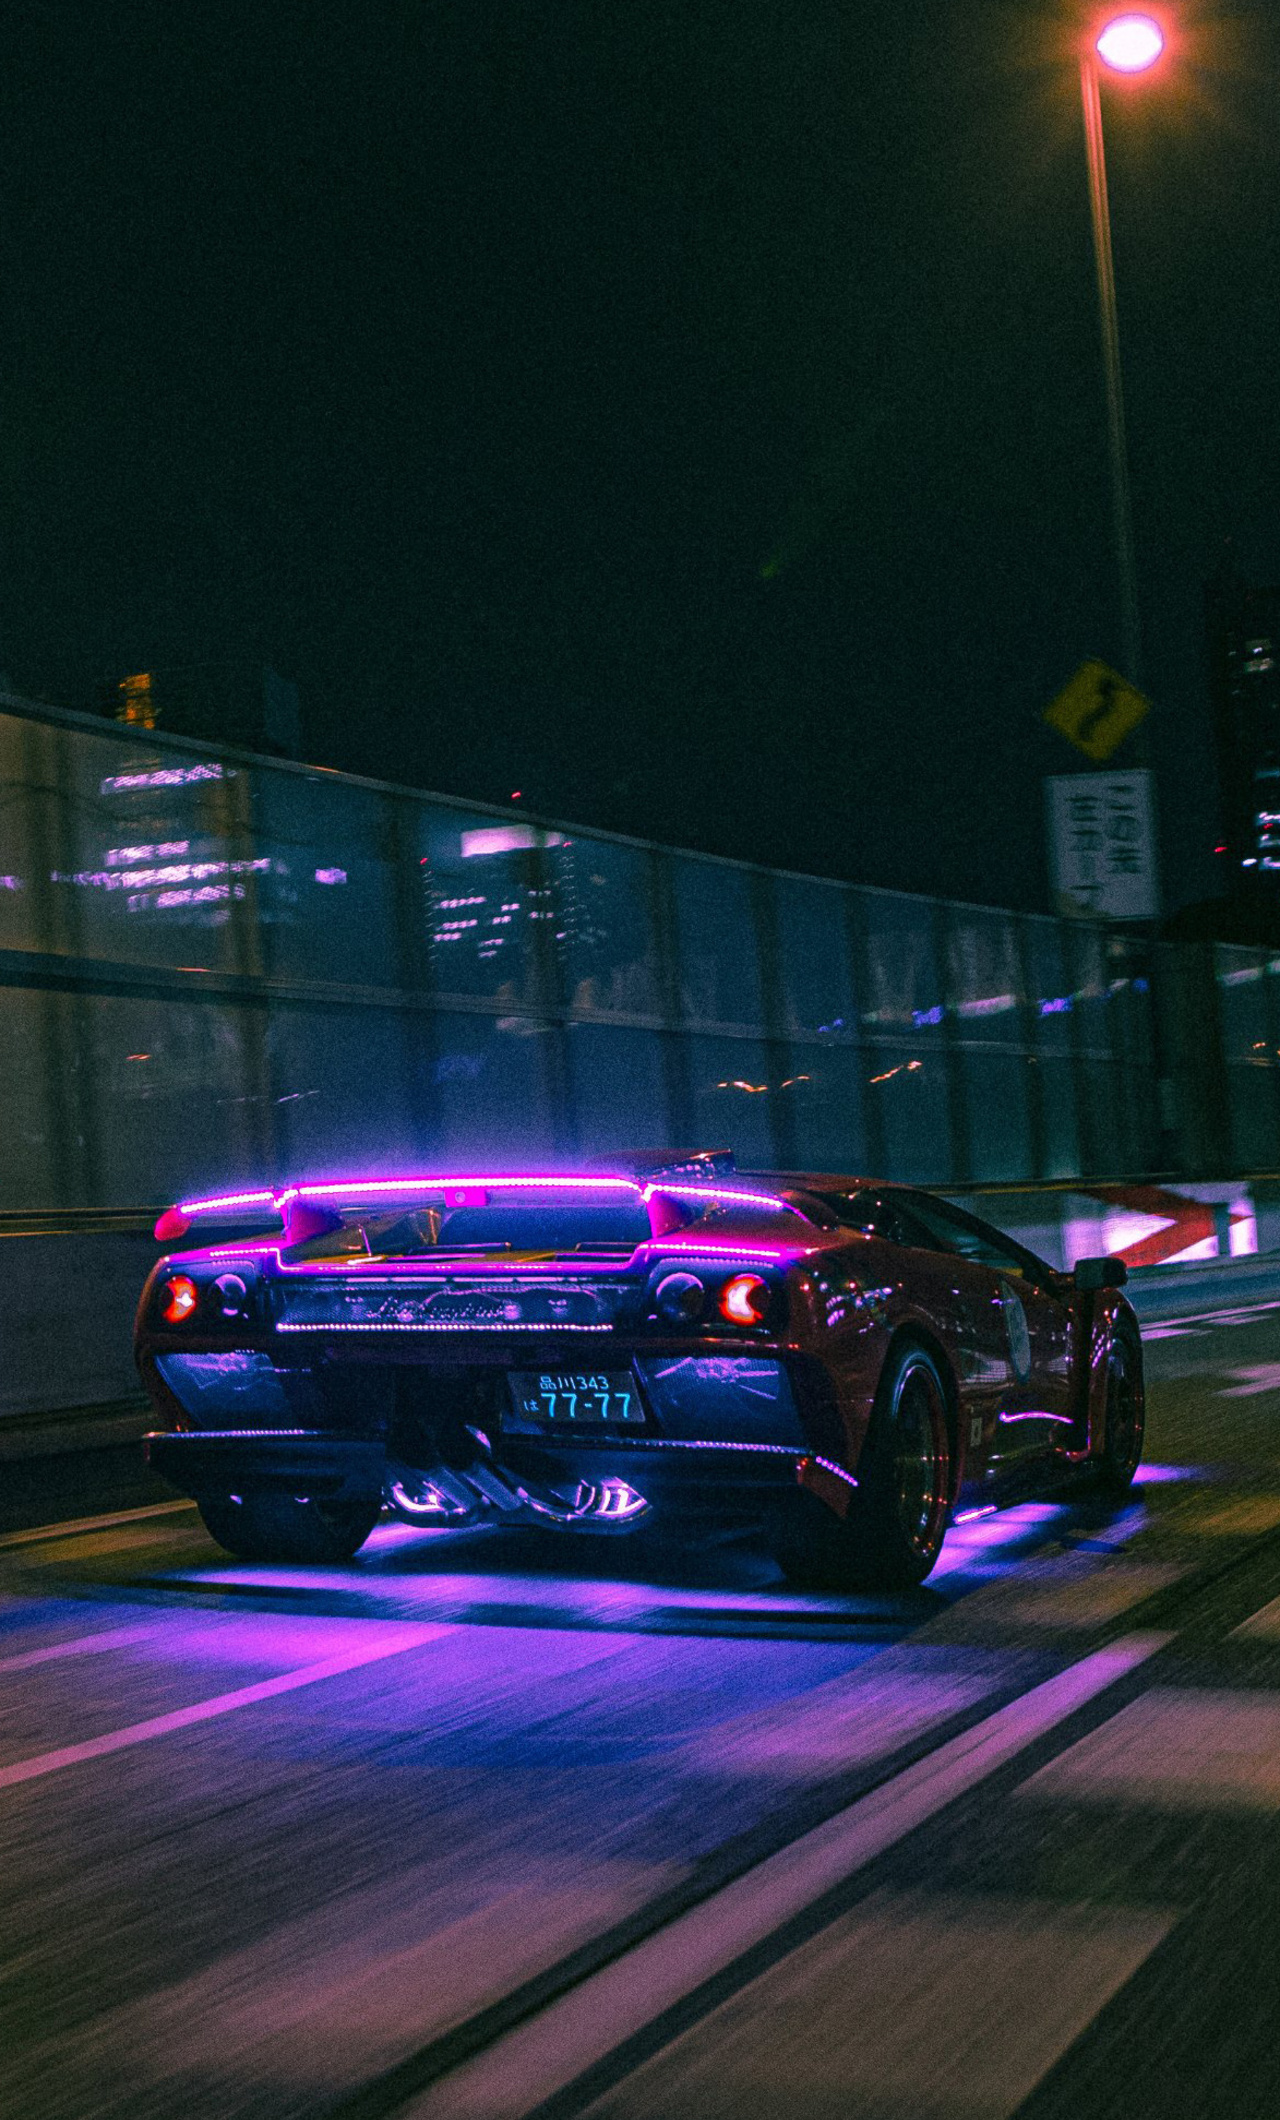 A car driving down the street at night - Neon